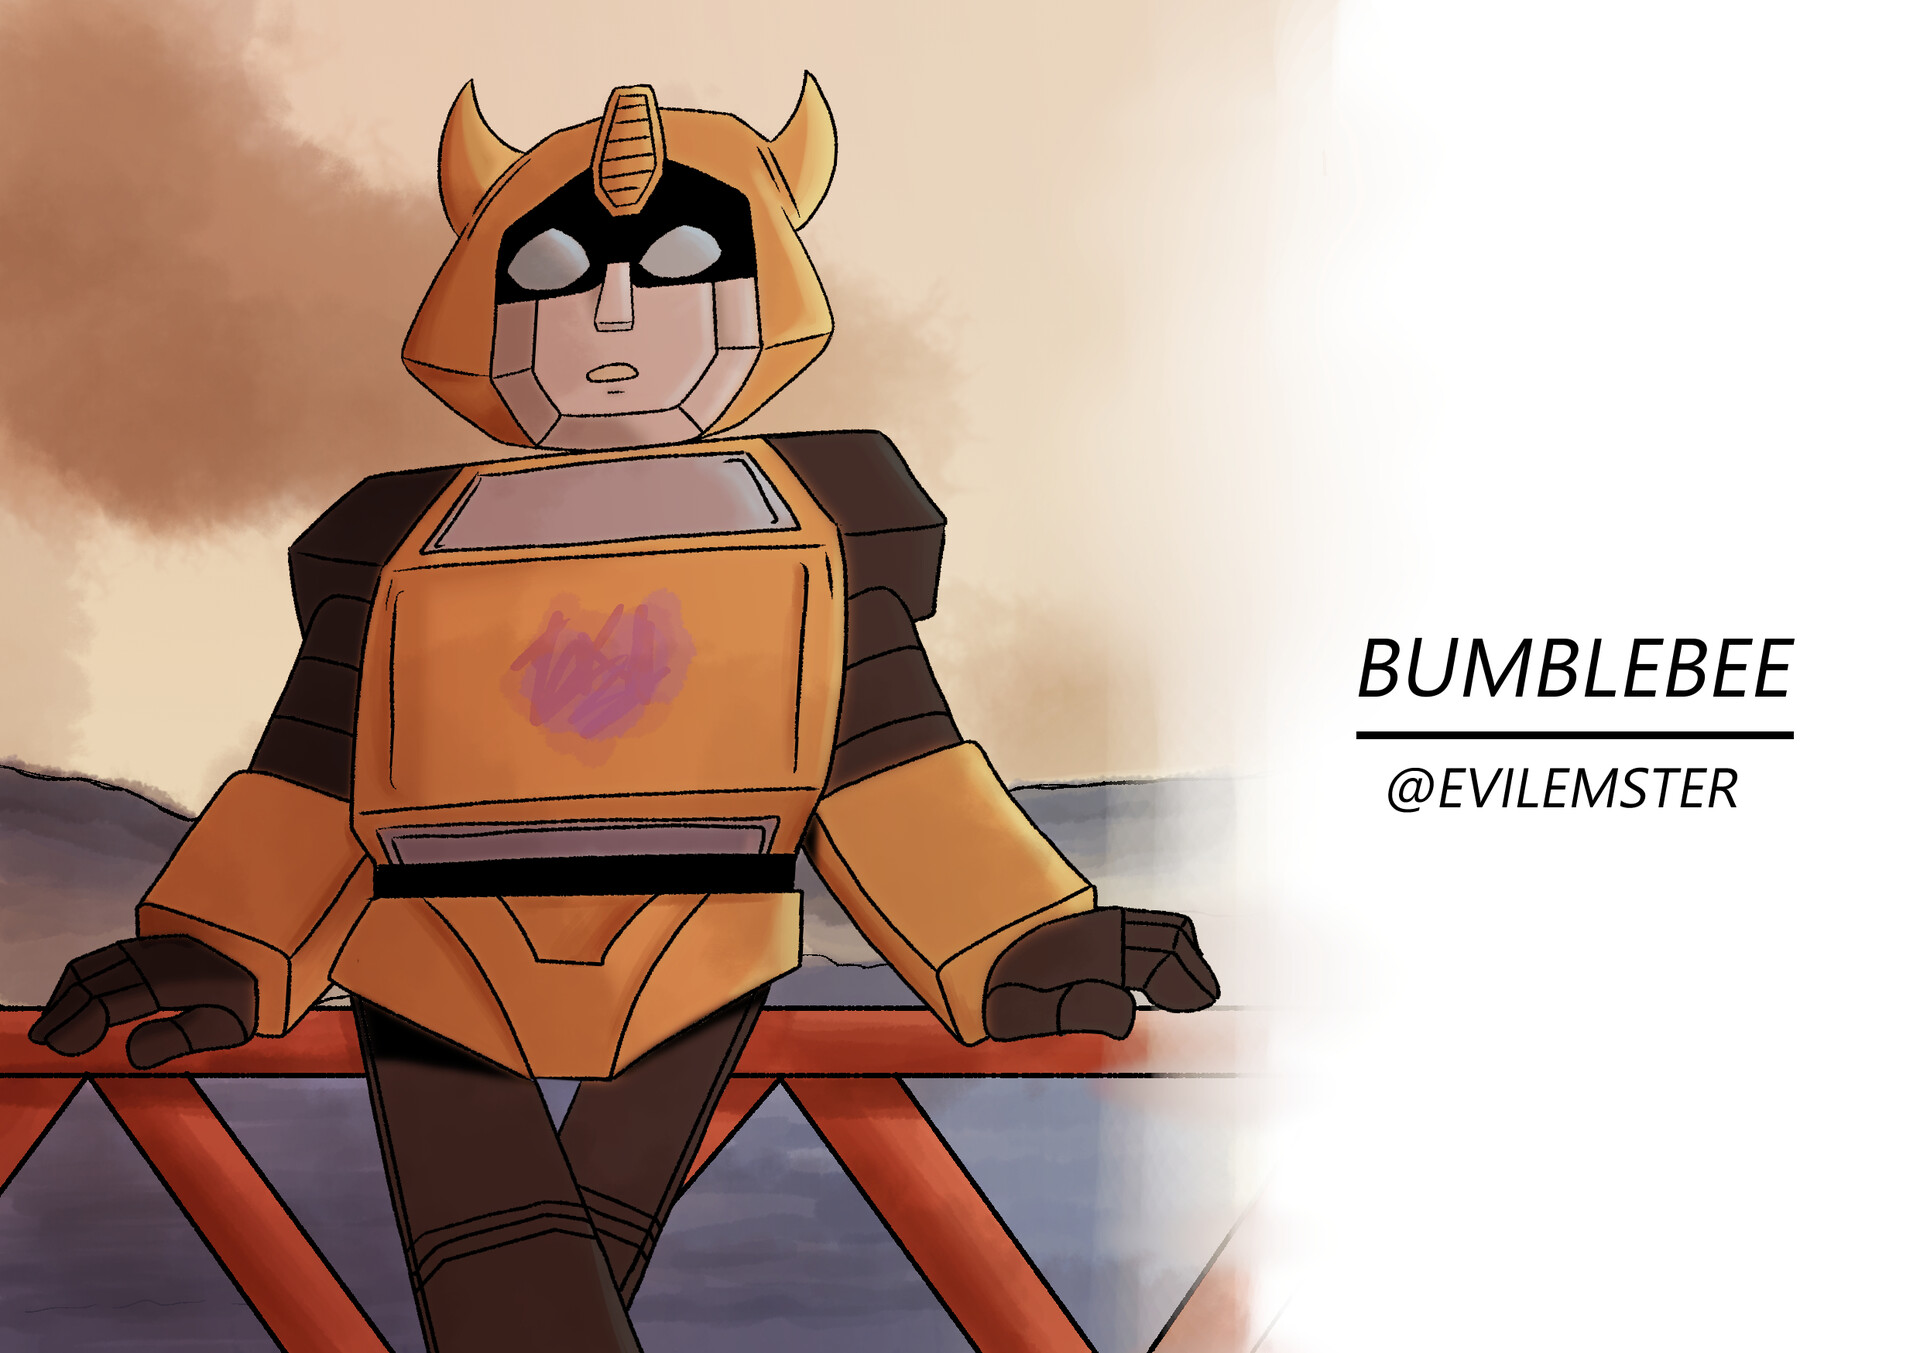 transformers fanfiction bumblebee is a decepticon